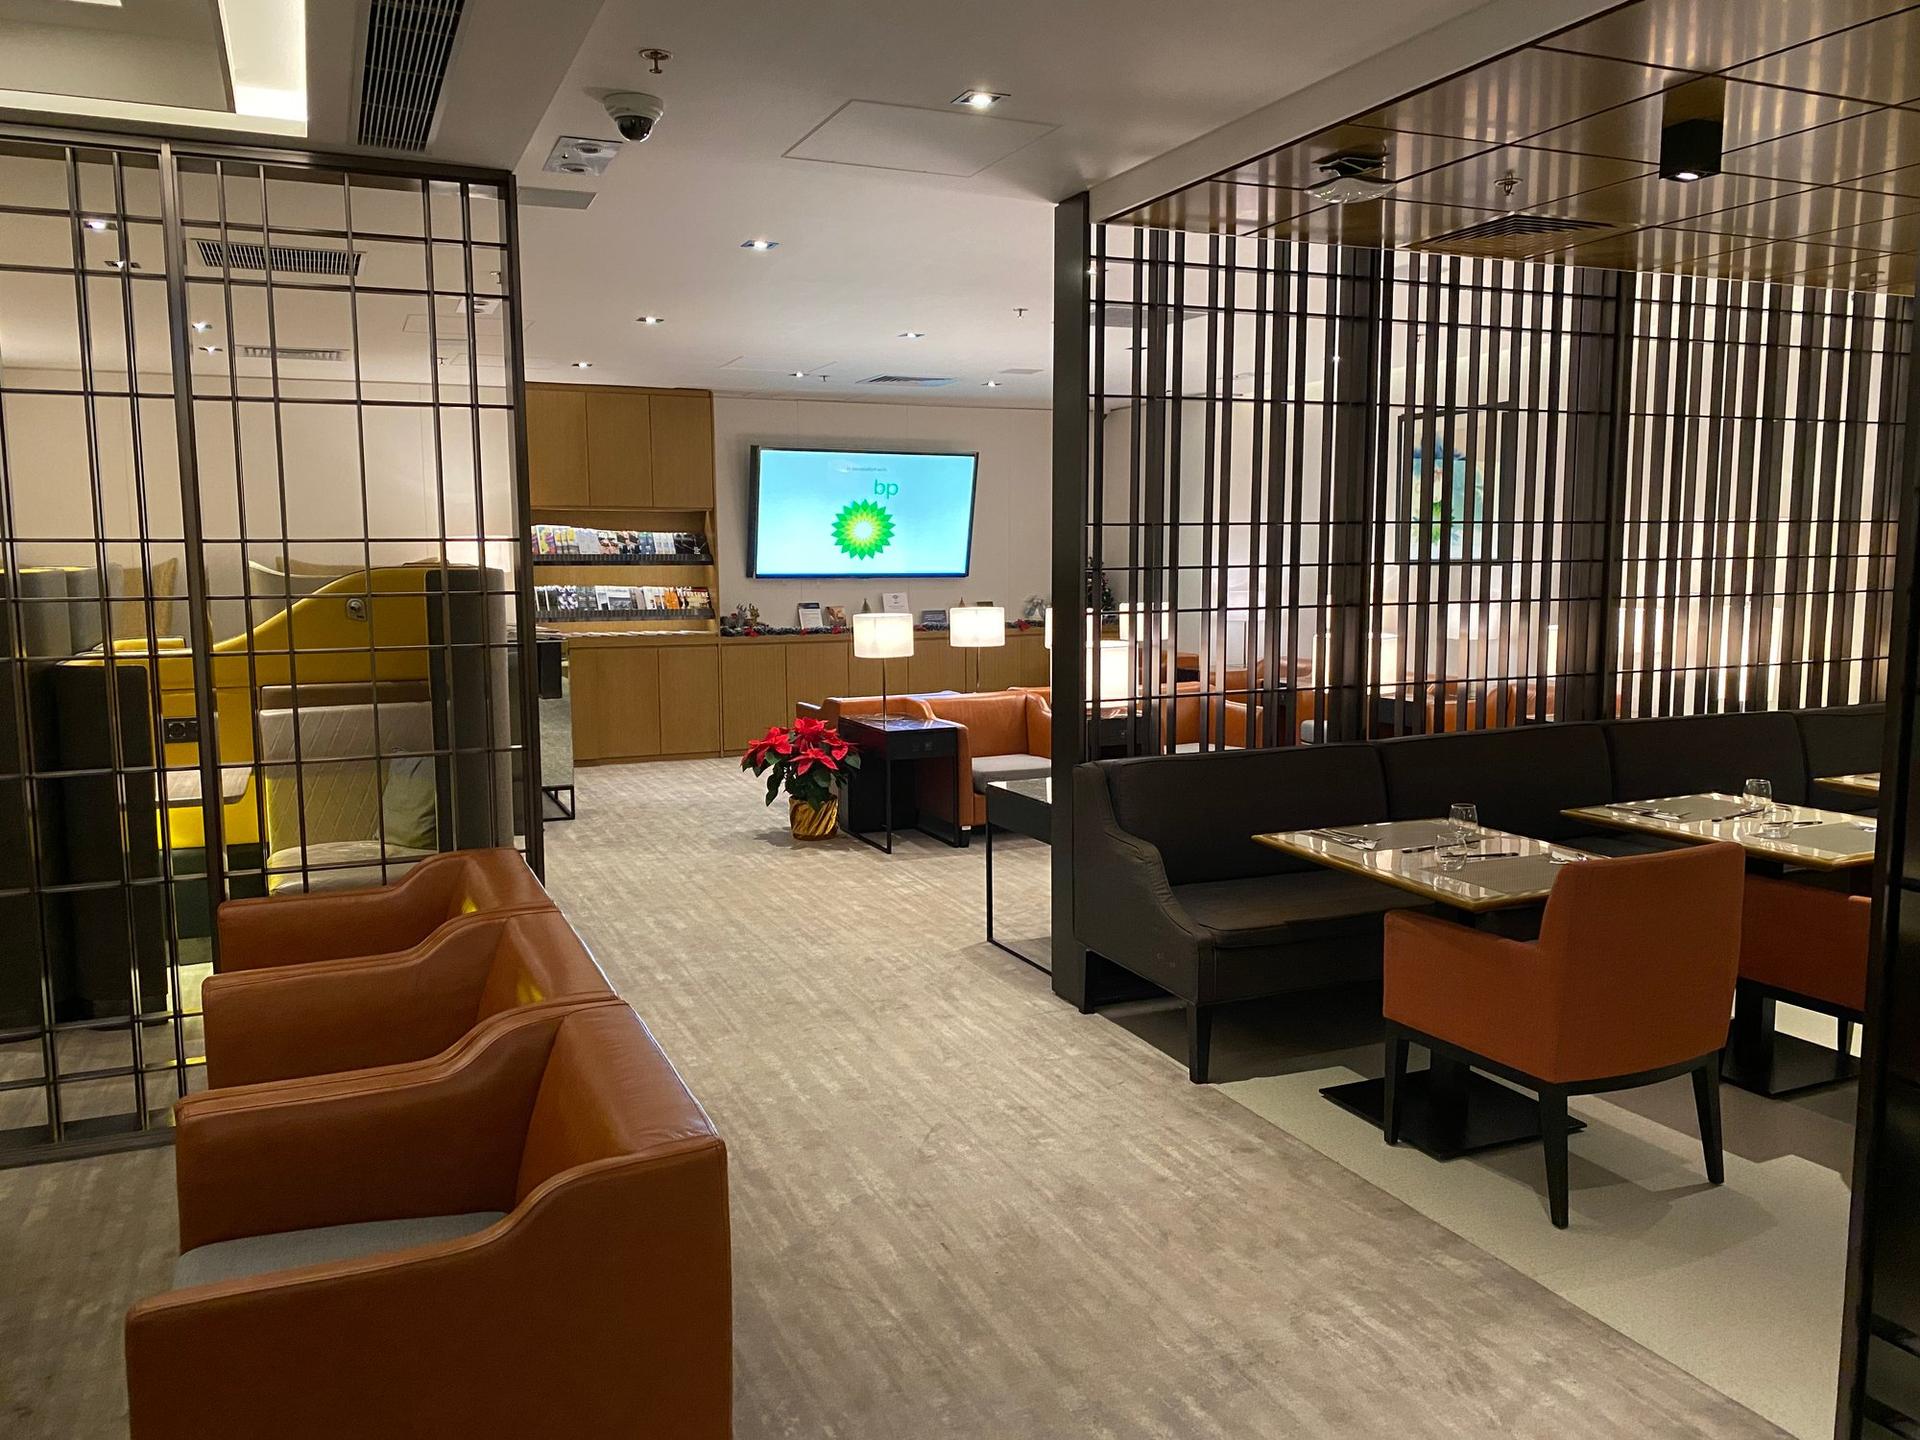 Singapore Airlines SilverKris Business Class Lounge image 16 of 68